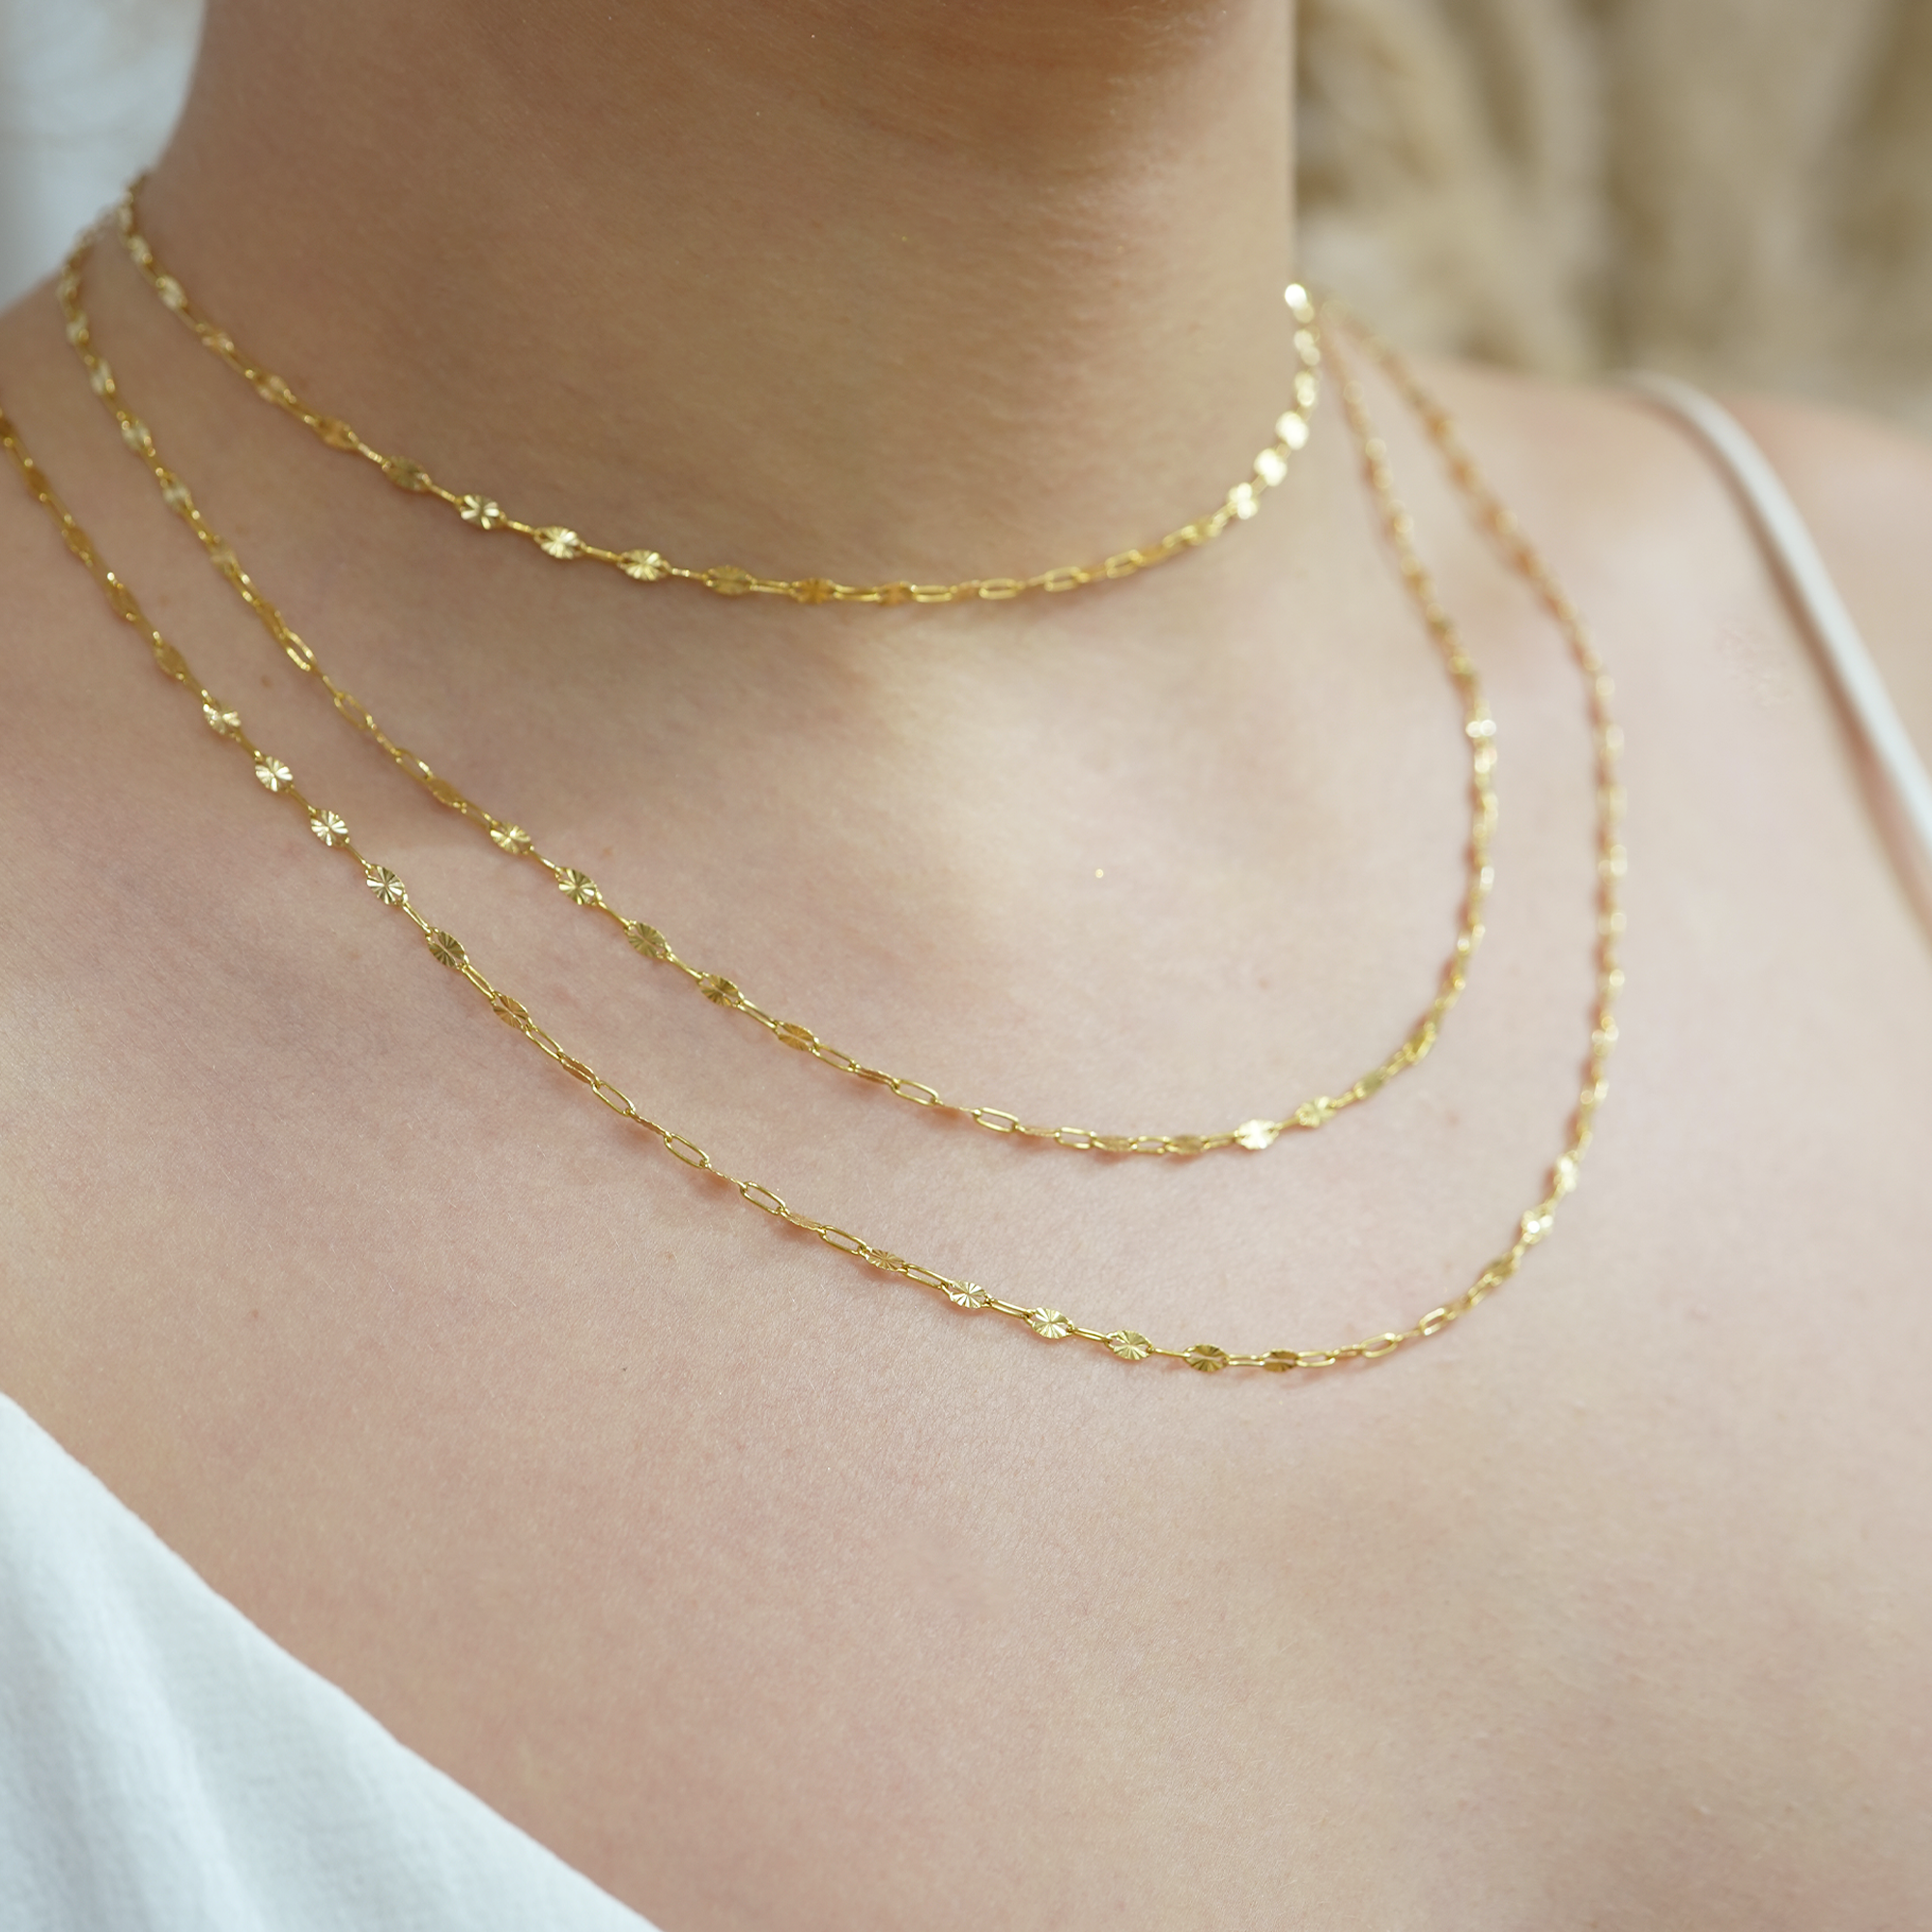 THE OVAL CLIP CHAIN NECKLACE